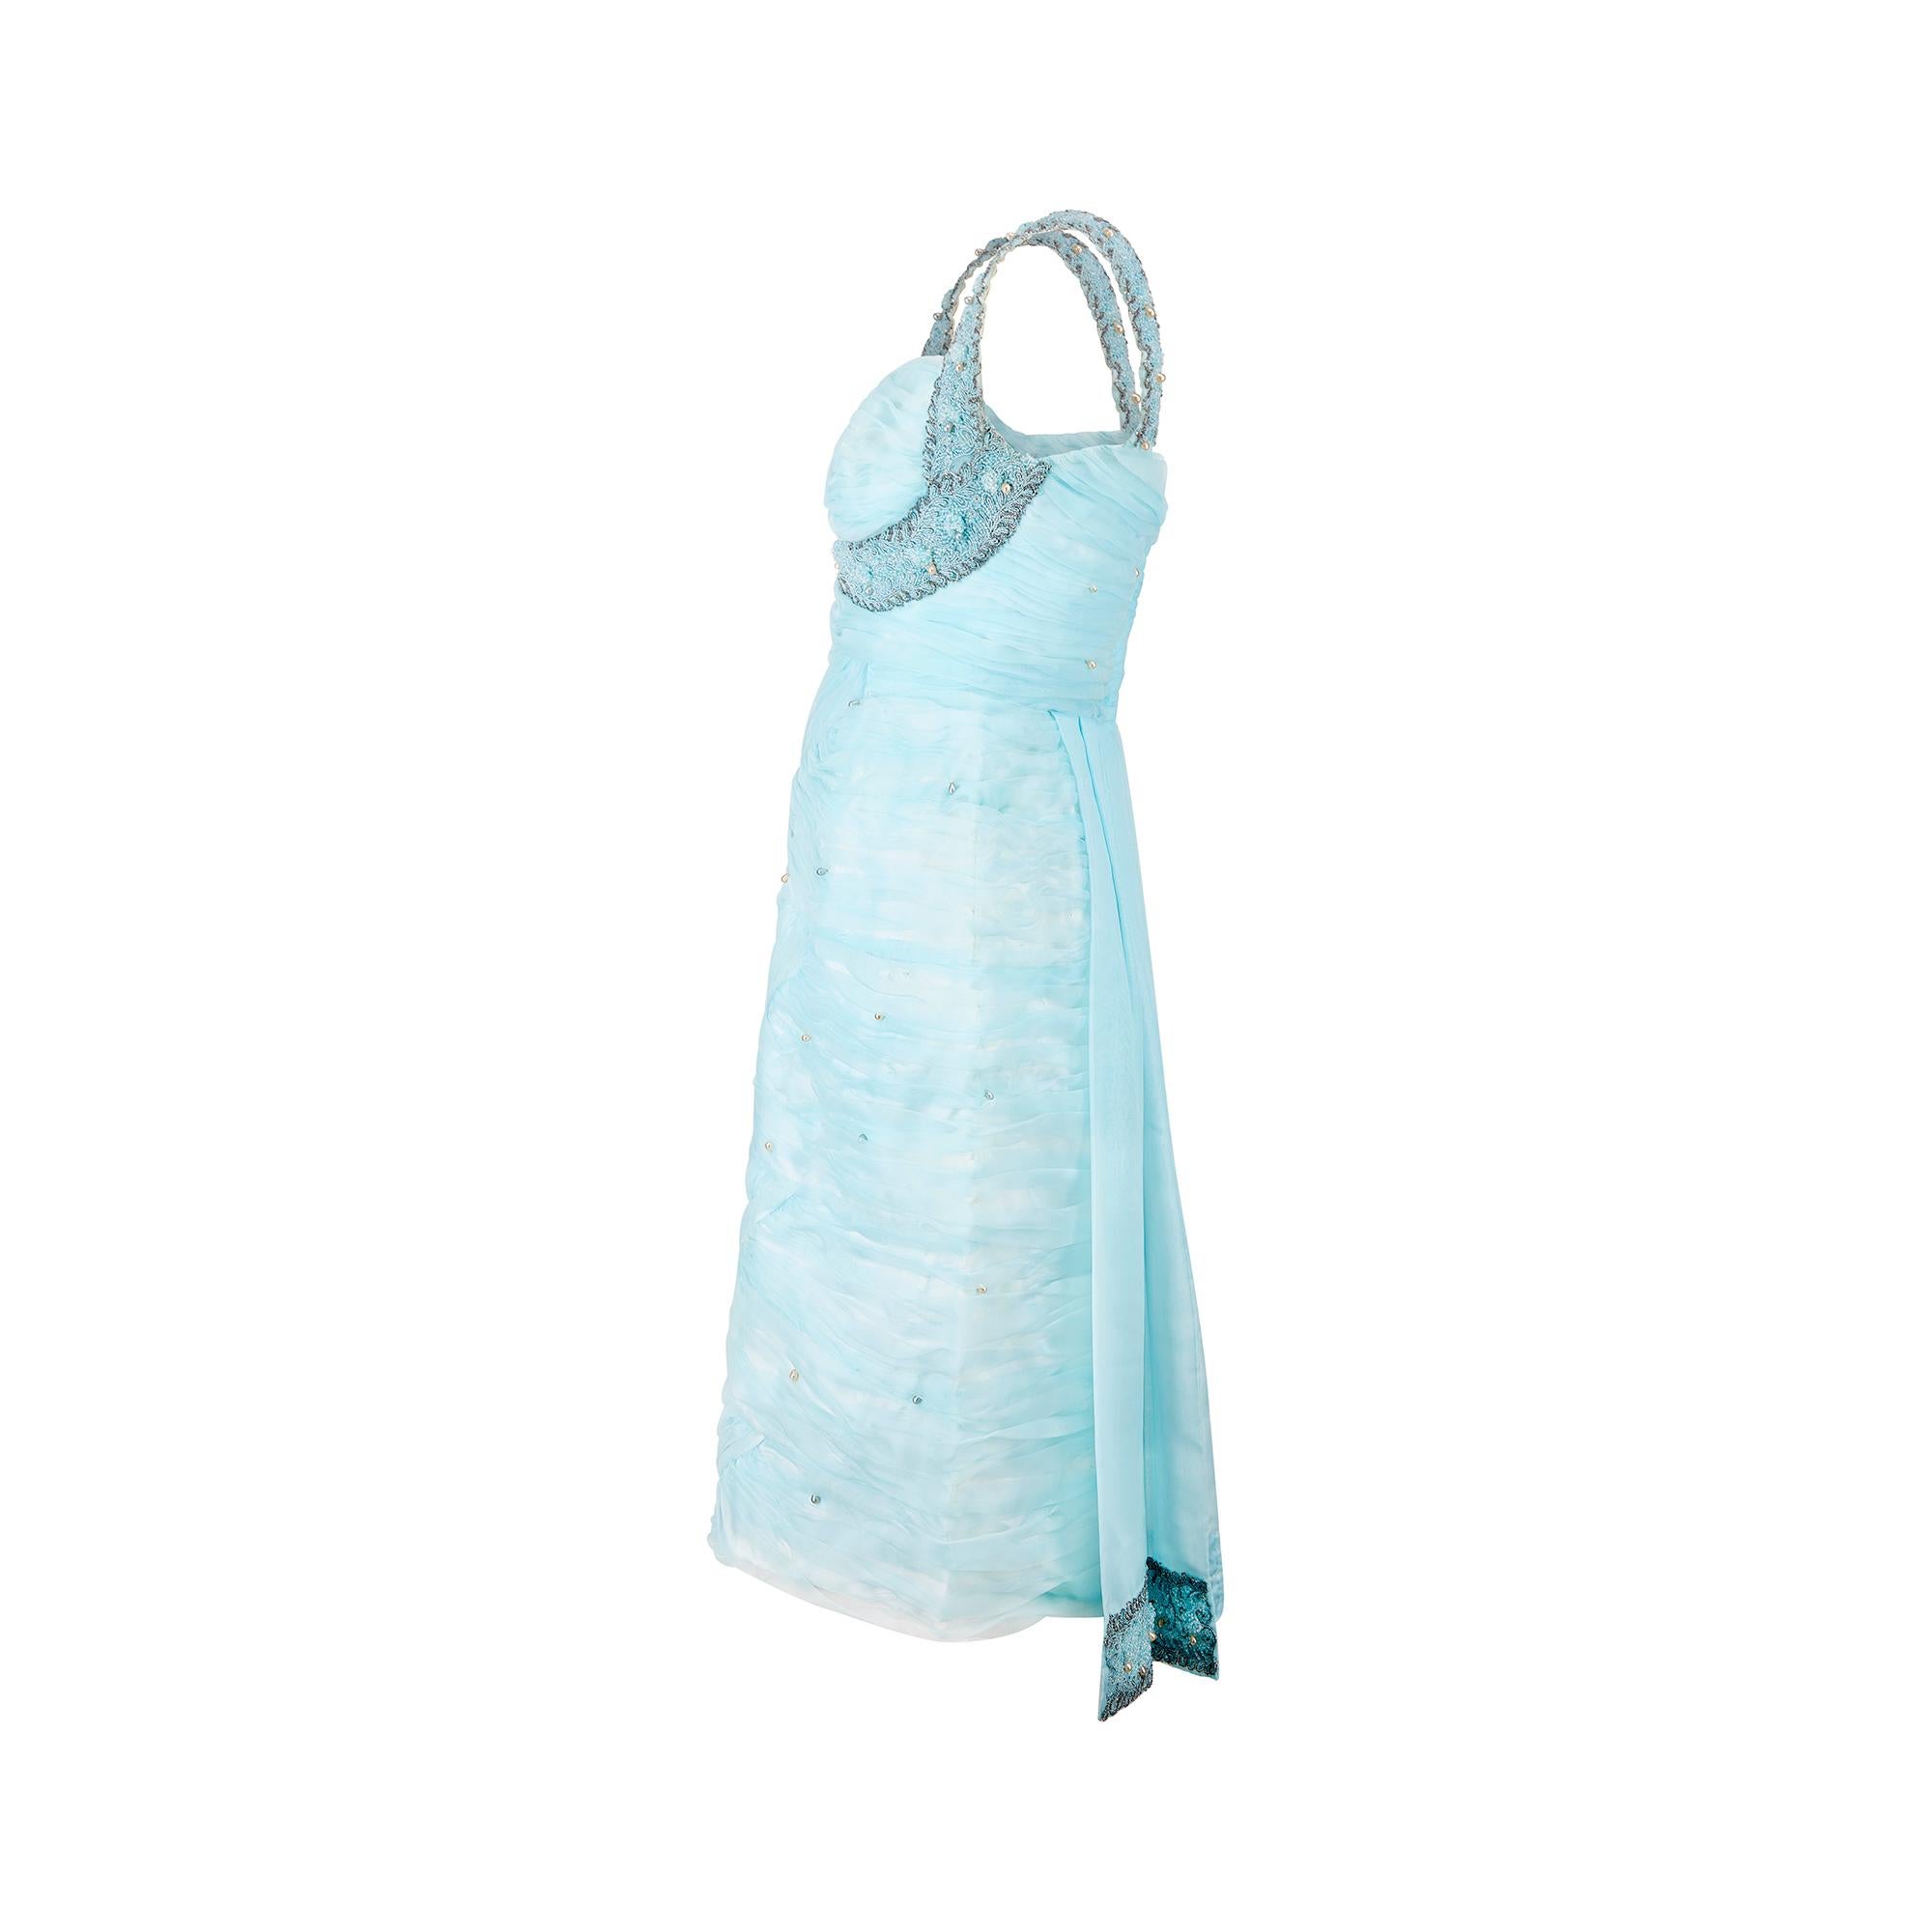 This 1960s  cocktail dress is intricately adorned with pale-aqua ruched manmade chiffon stitched in a scalloped pattern across the entire body, the resulting effect is soft and cloud-like; the only distraction the occasional ivory or blue pearl